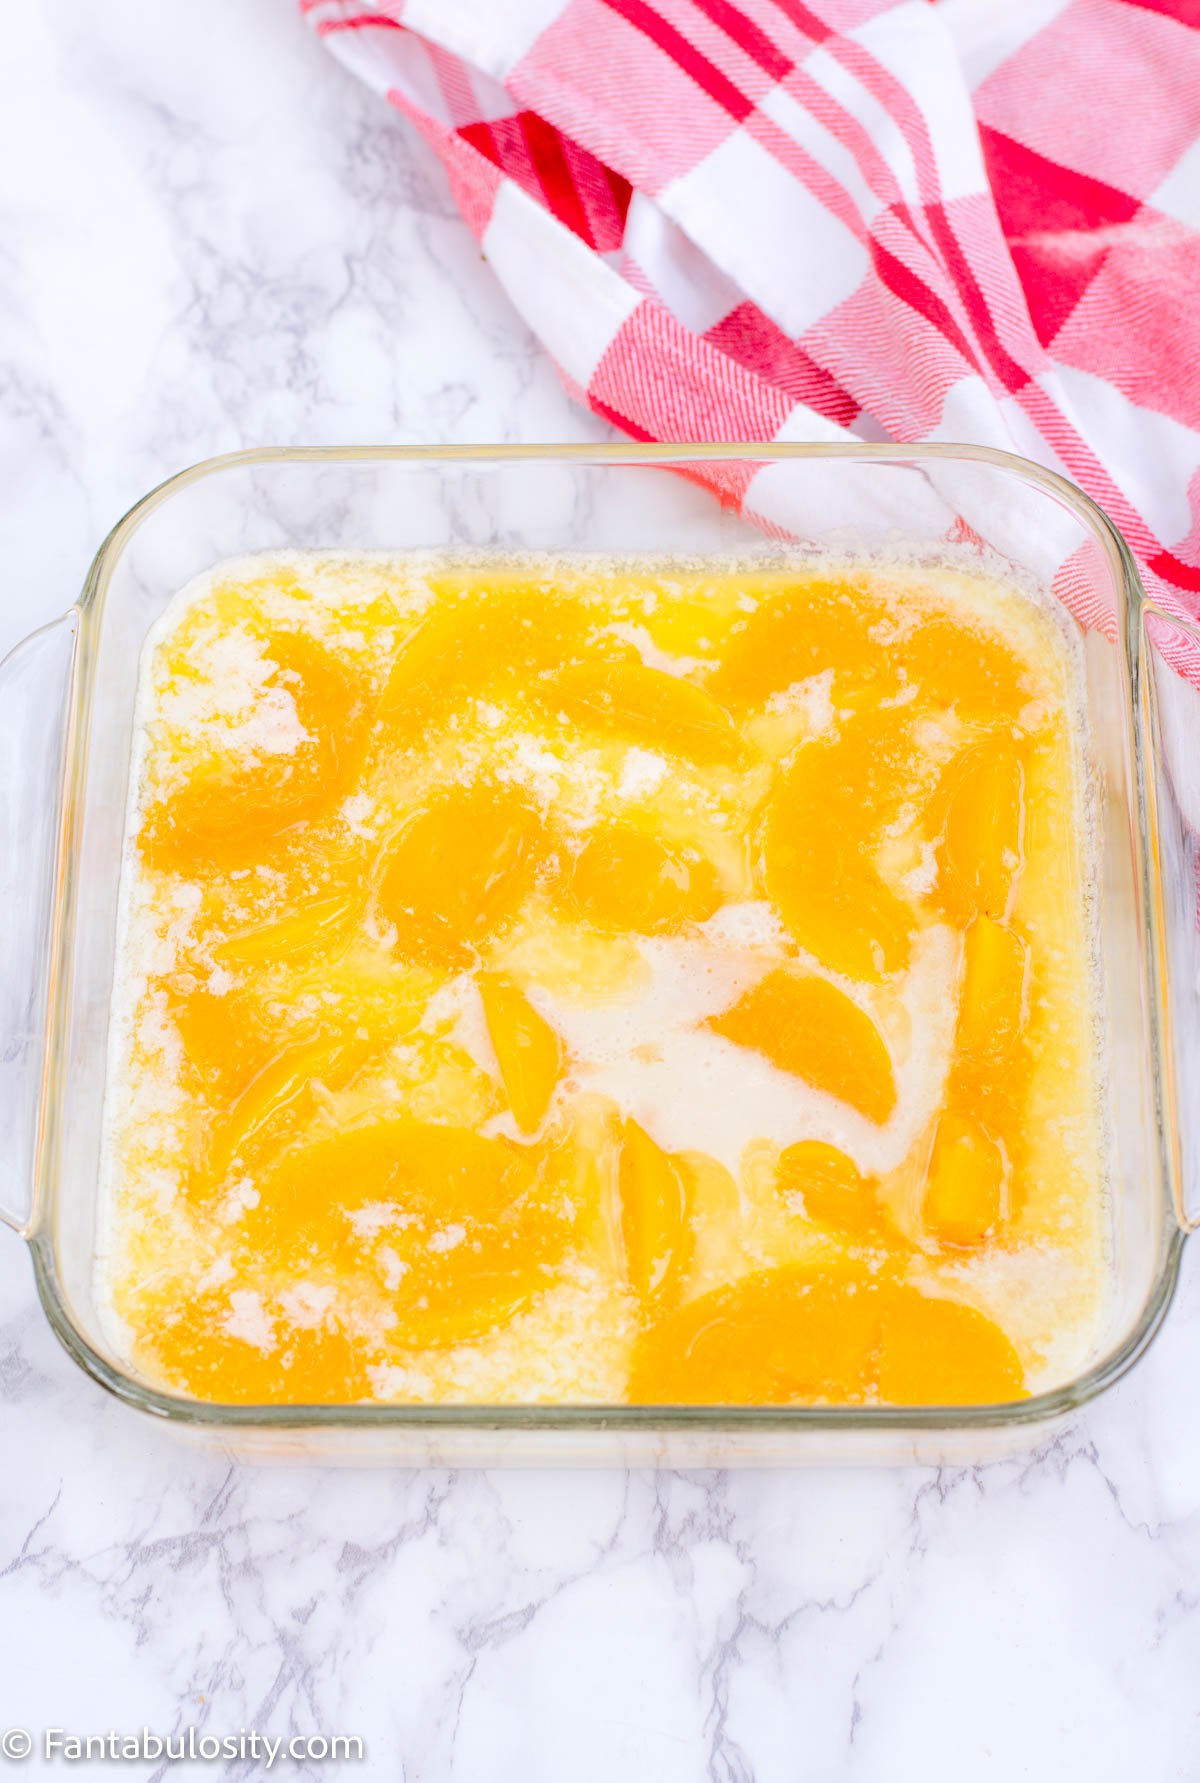 Place canned peaches (without juice) on top